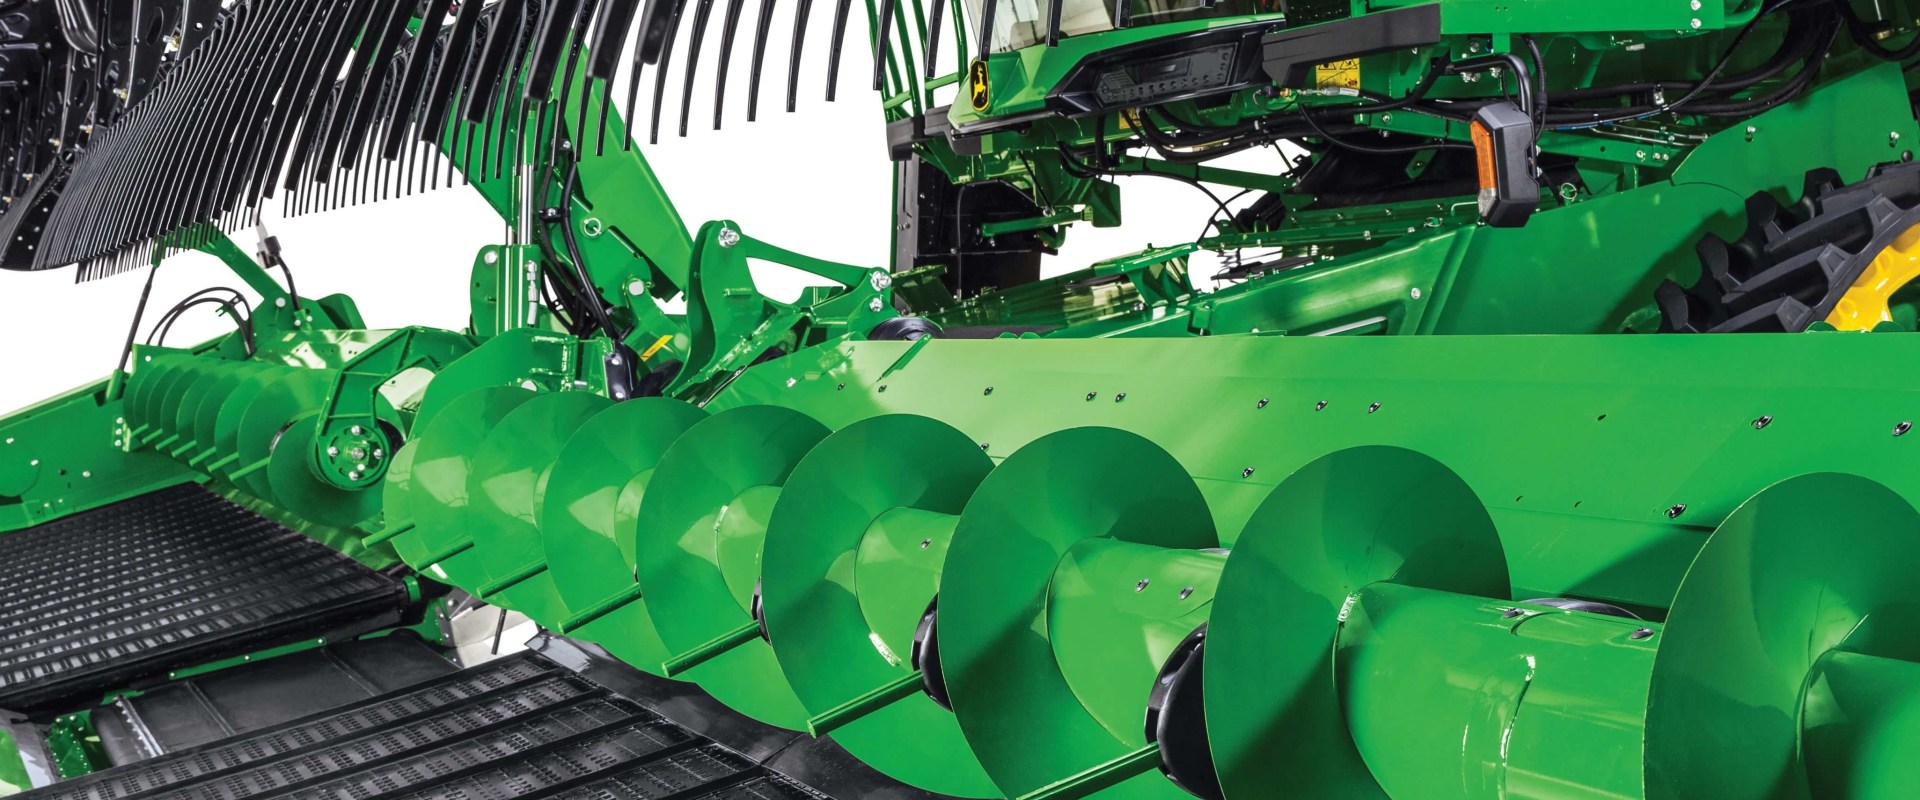 Upgrading Machinery Performance with New Technology